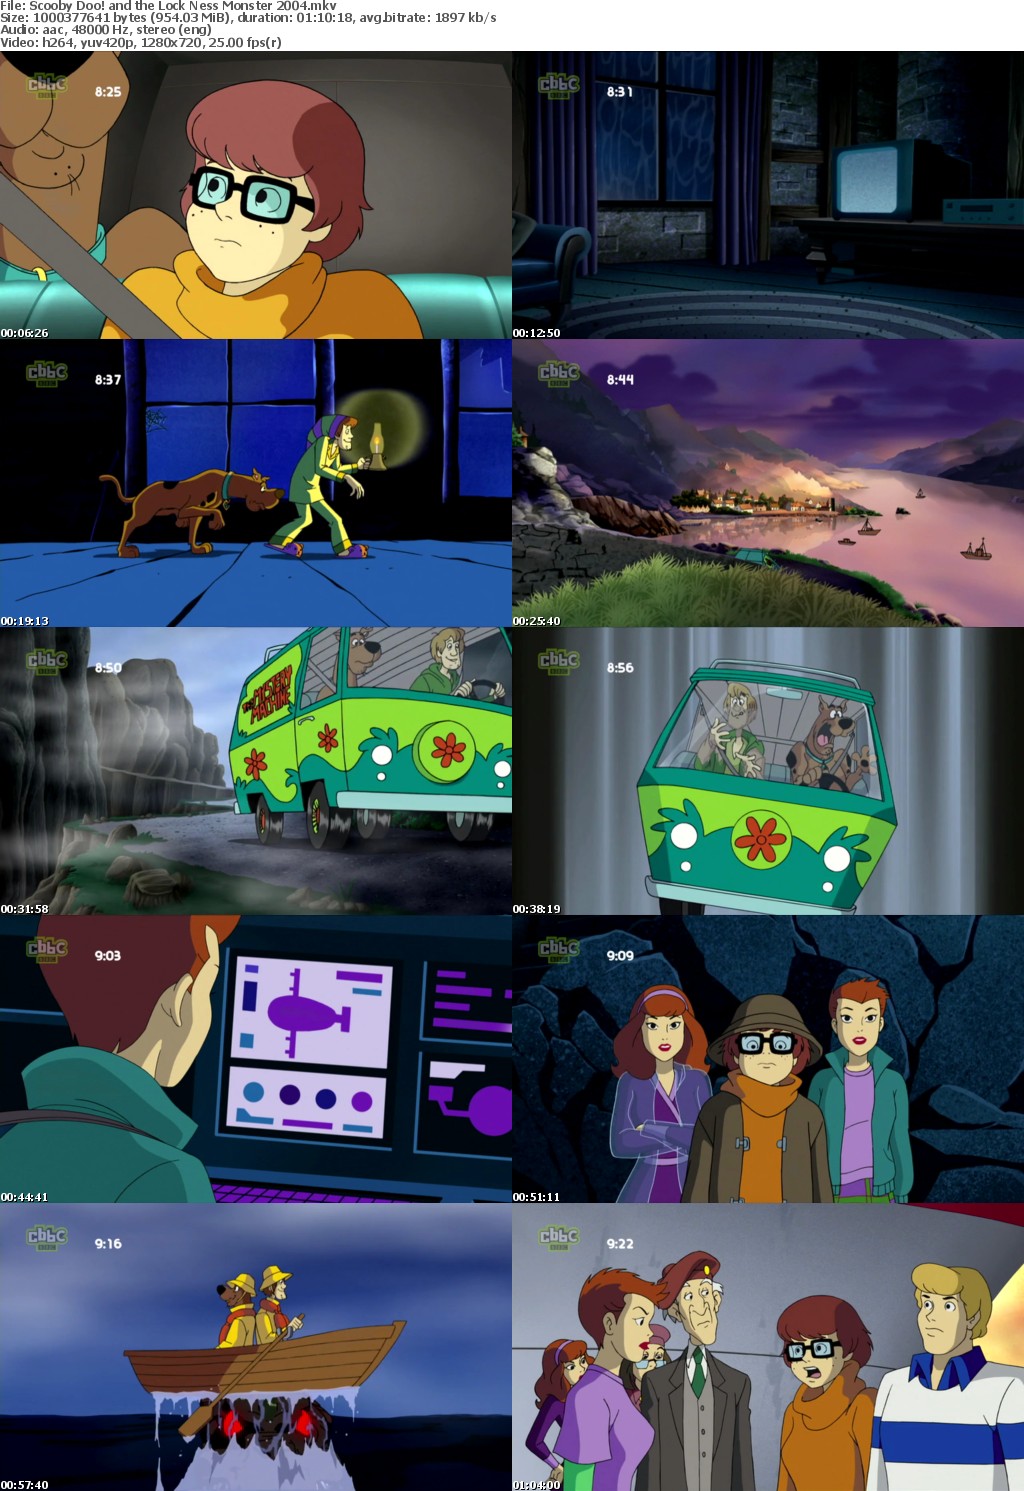 Scooby Doo! and the Lock Ness Monster 2004 720p HDTV x264 i c